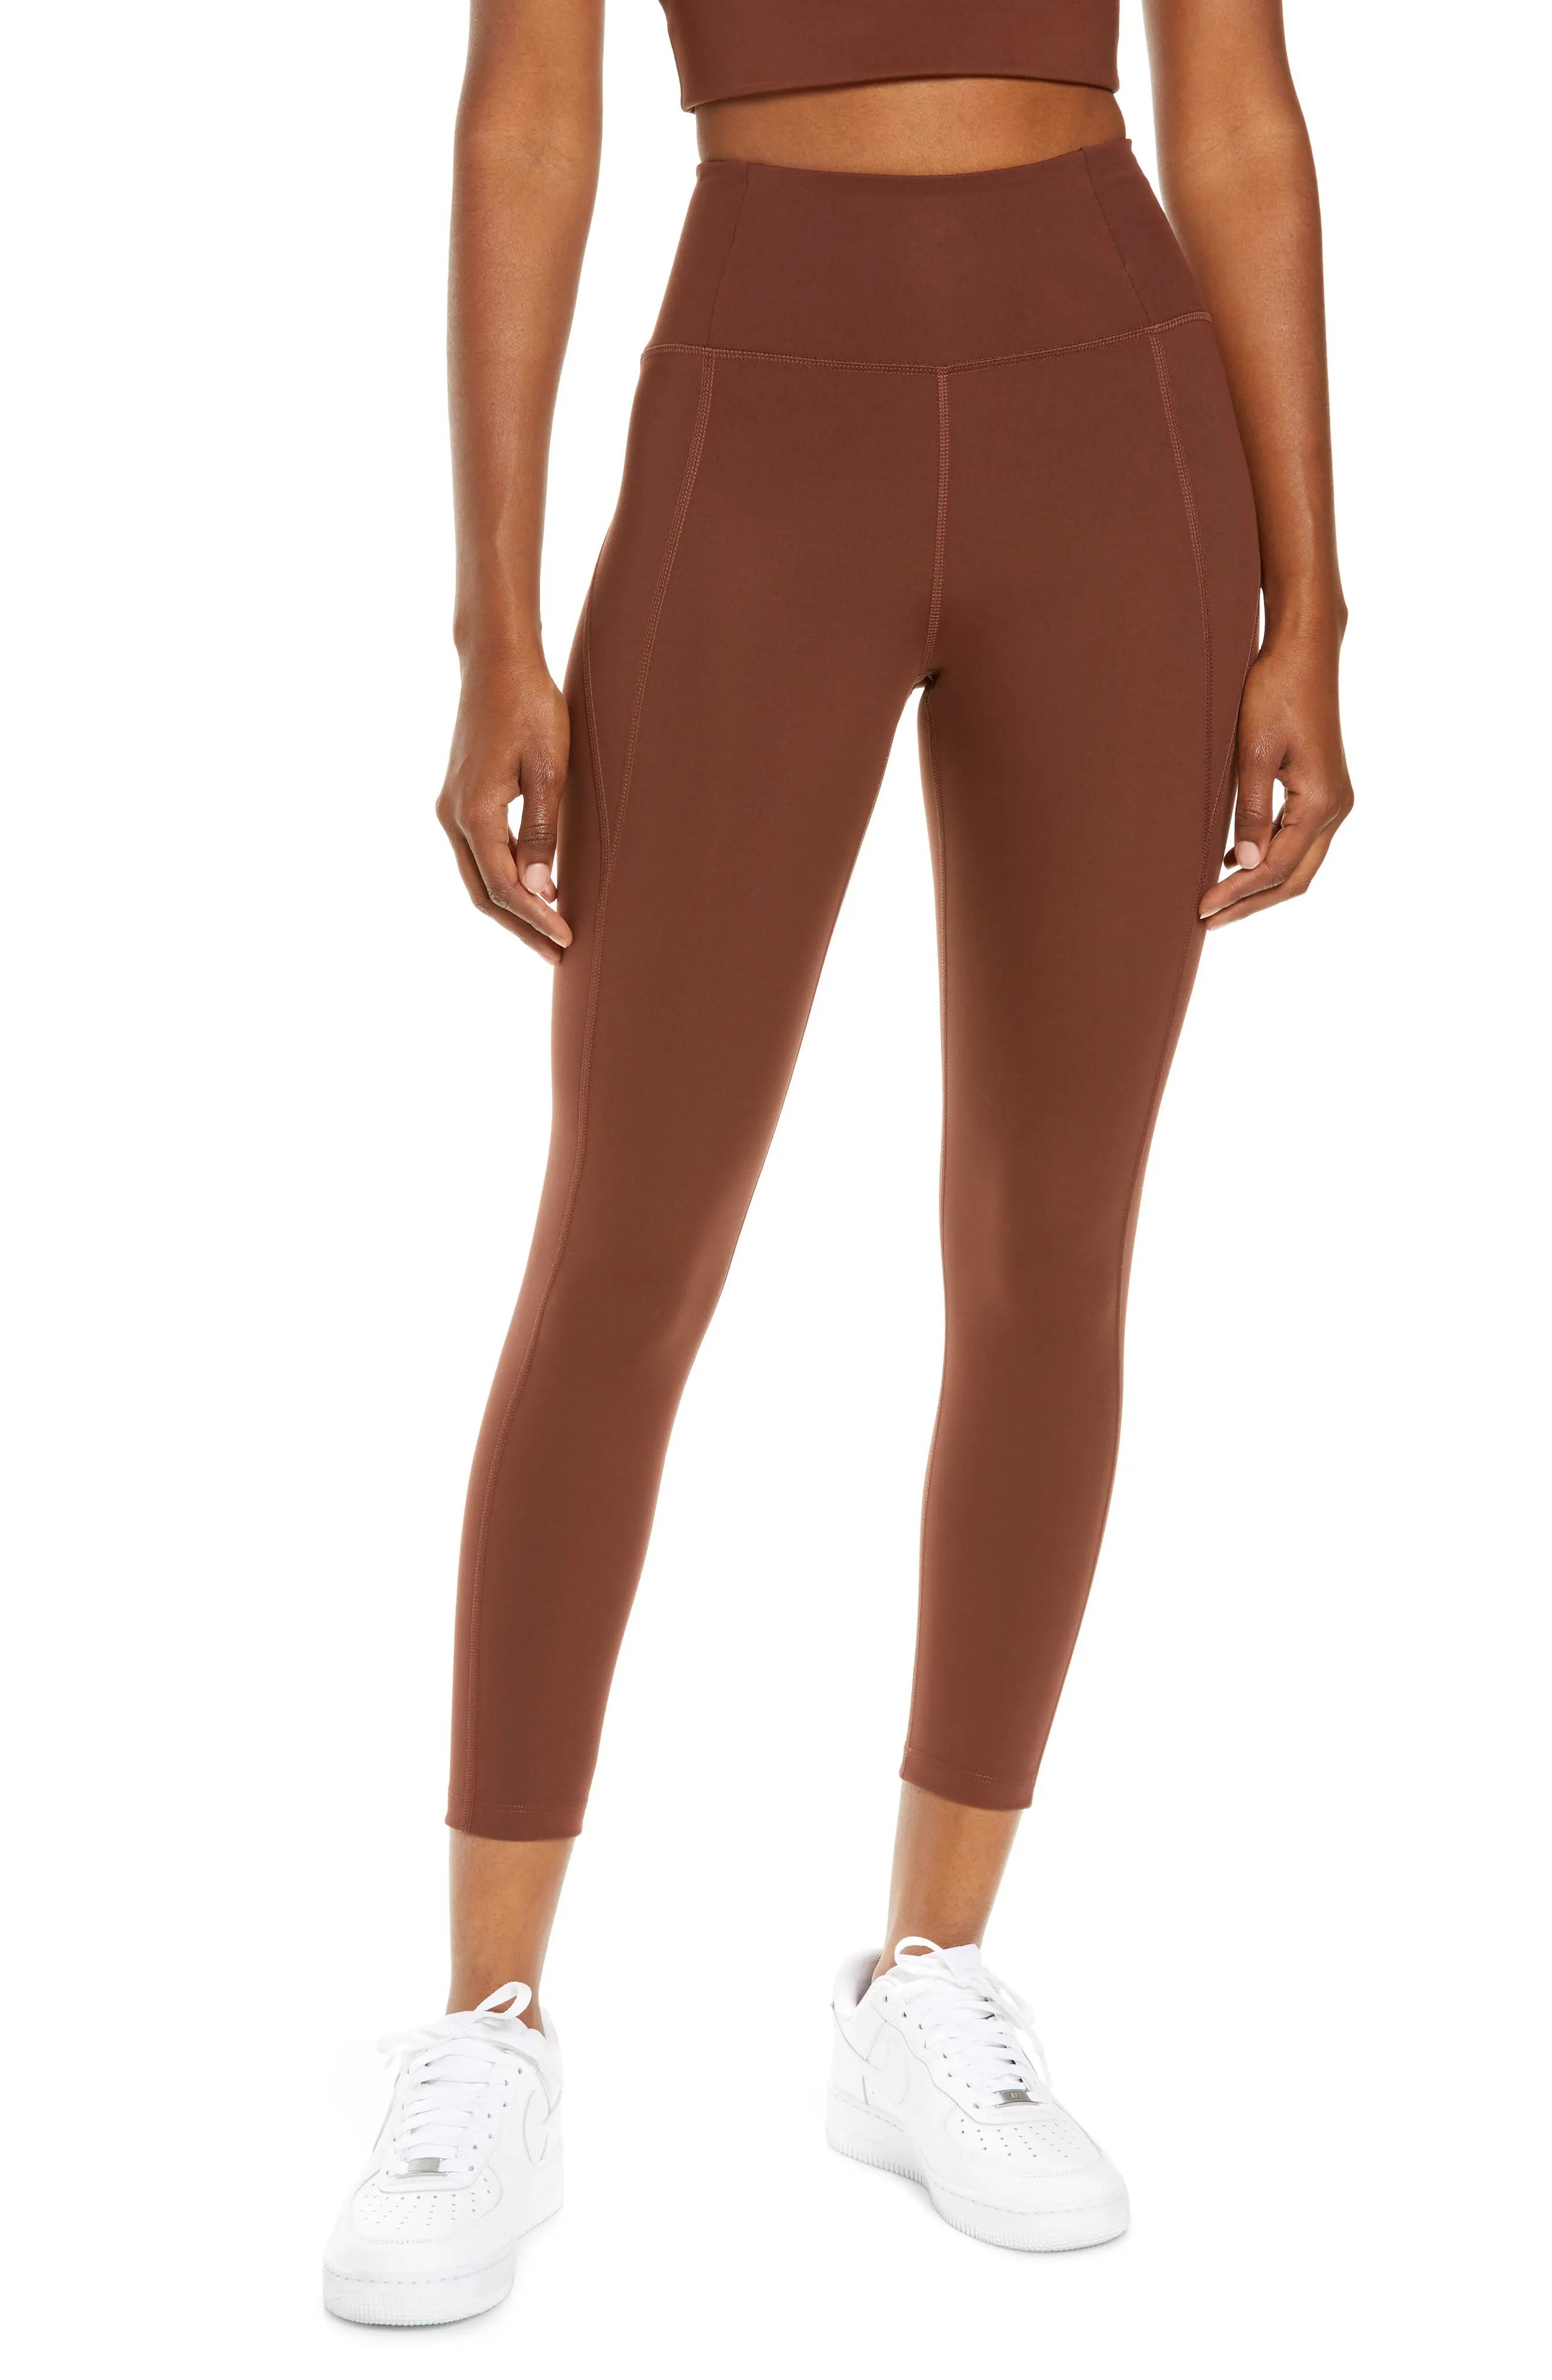 Girlfriend Collective High Waist 7/8 Leggings, Size X-Small in Earth at Nordstrom | Nordstrom